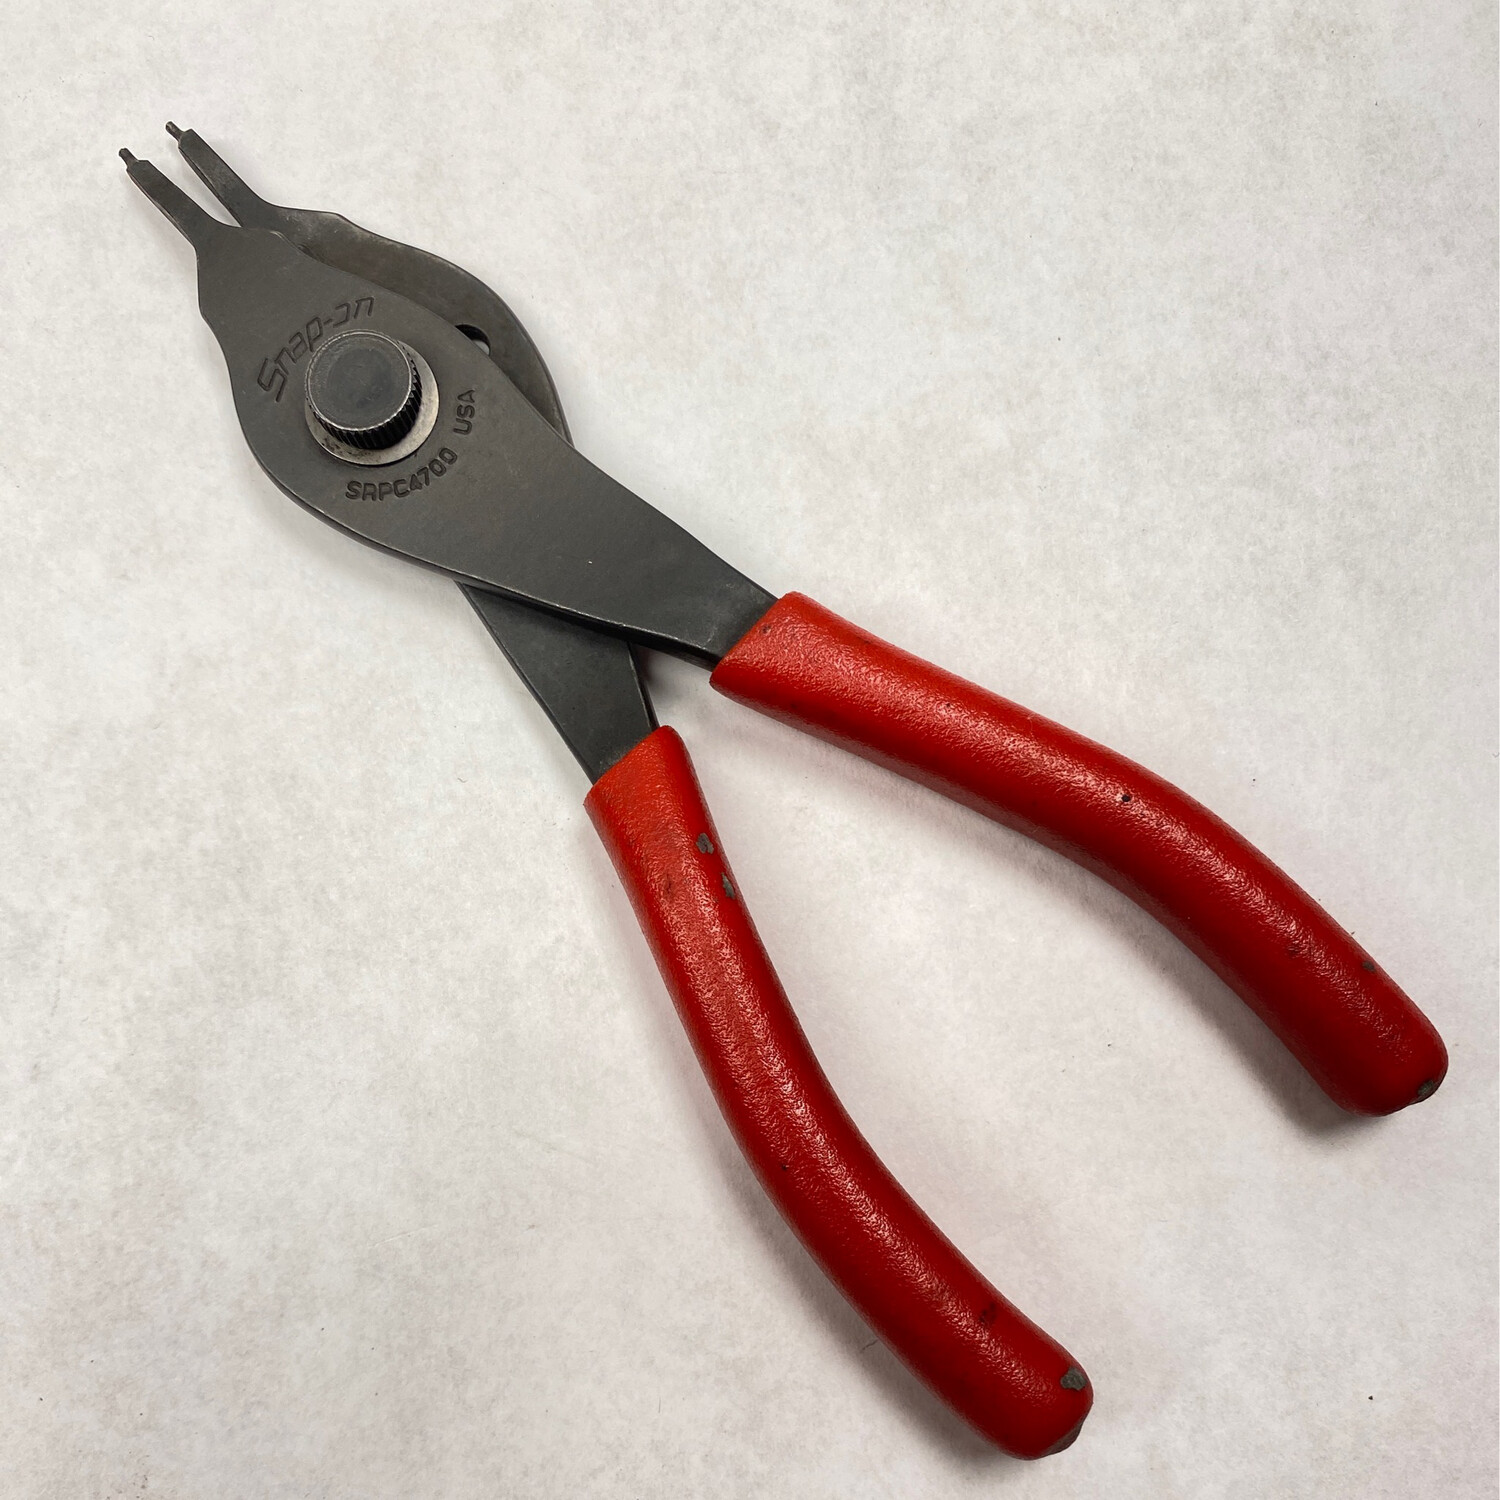 Snap On Convertible Straight Retaining Snap Ring Pliers, SRPC4700